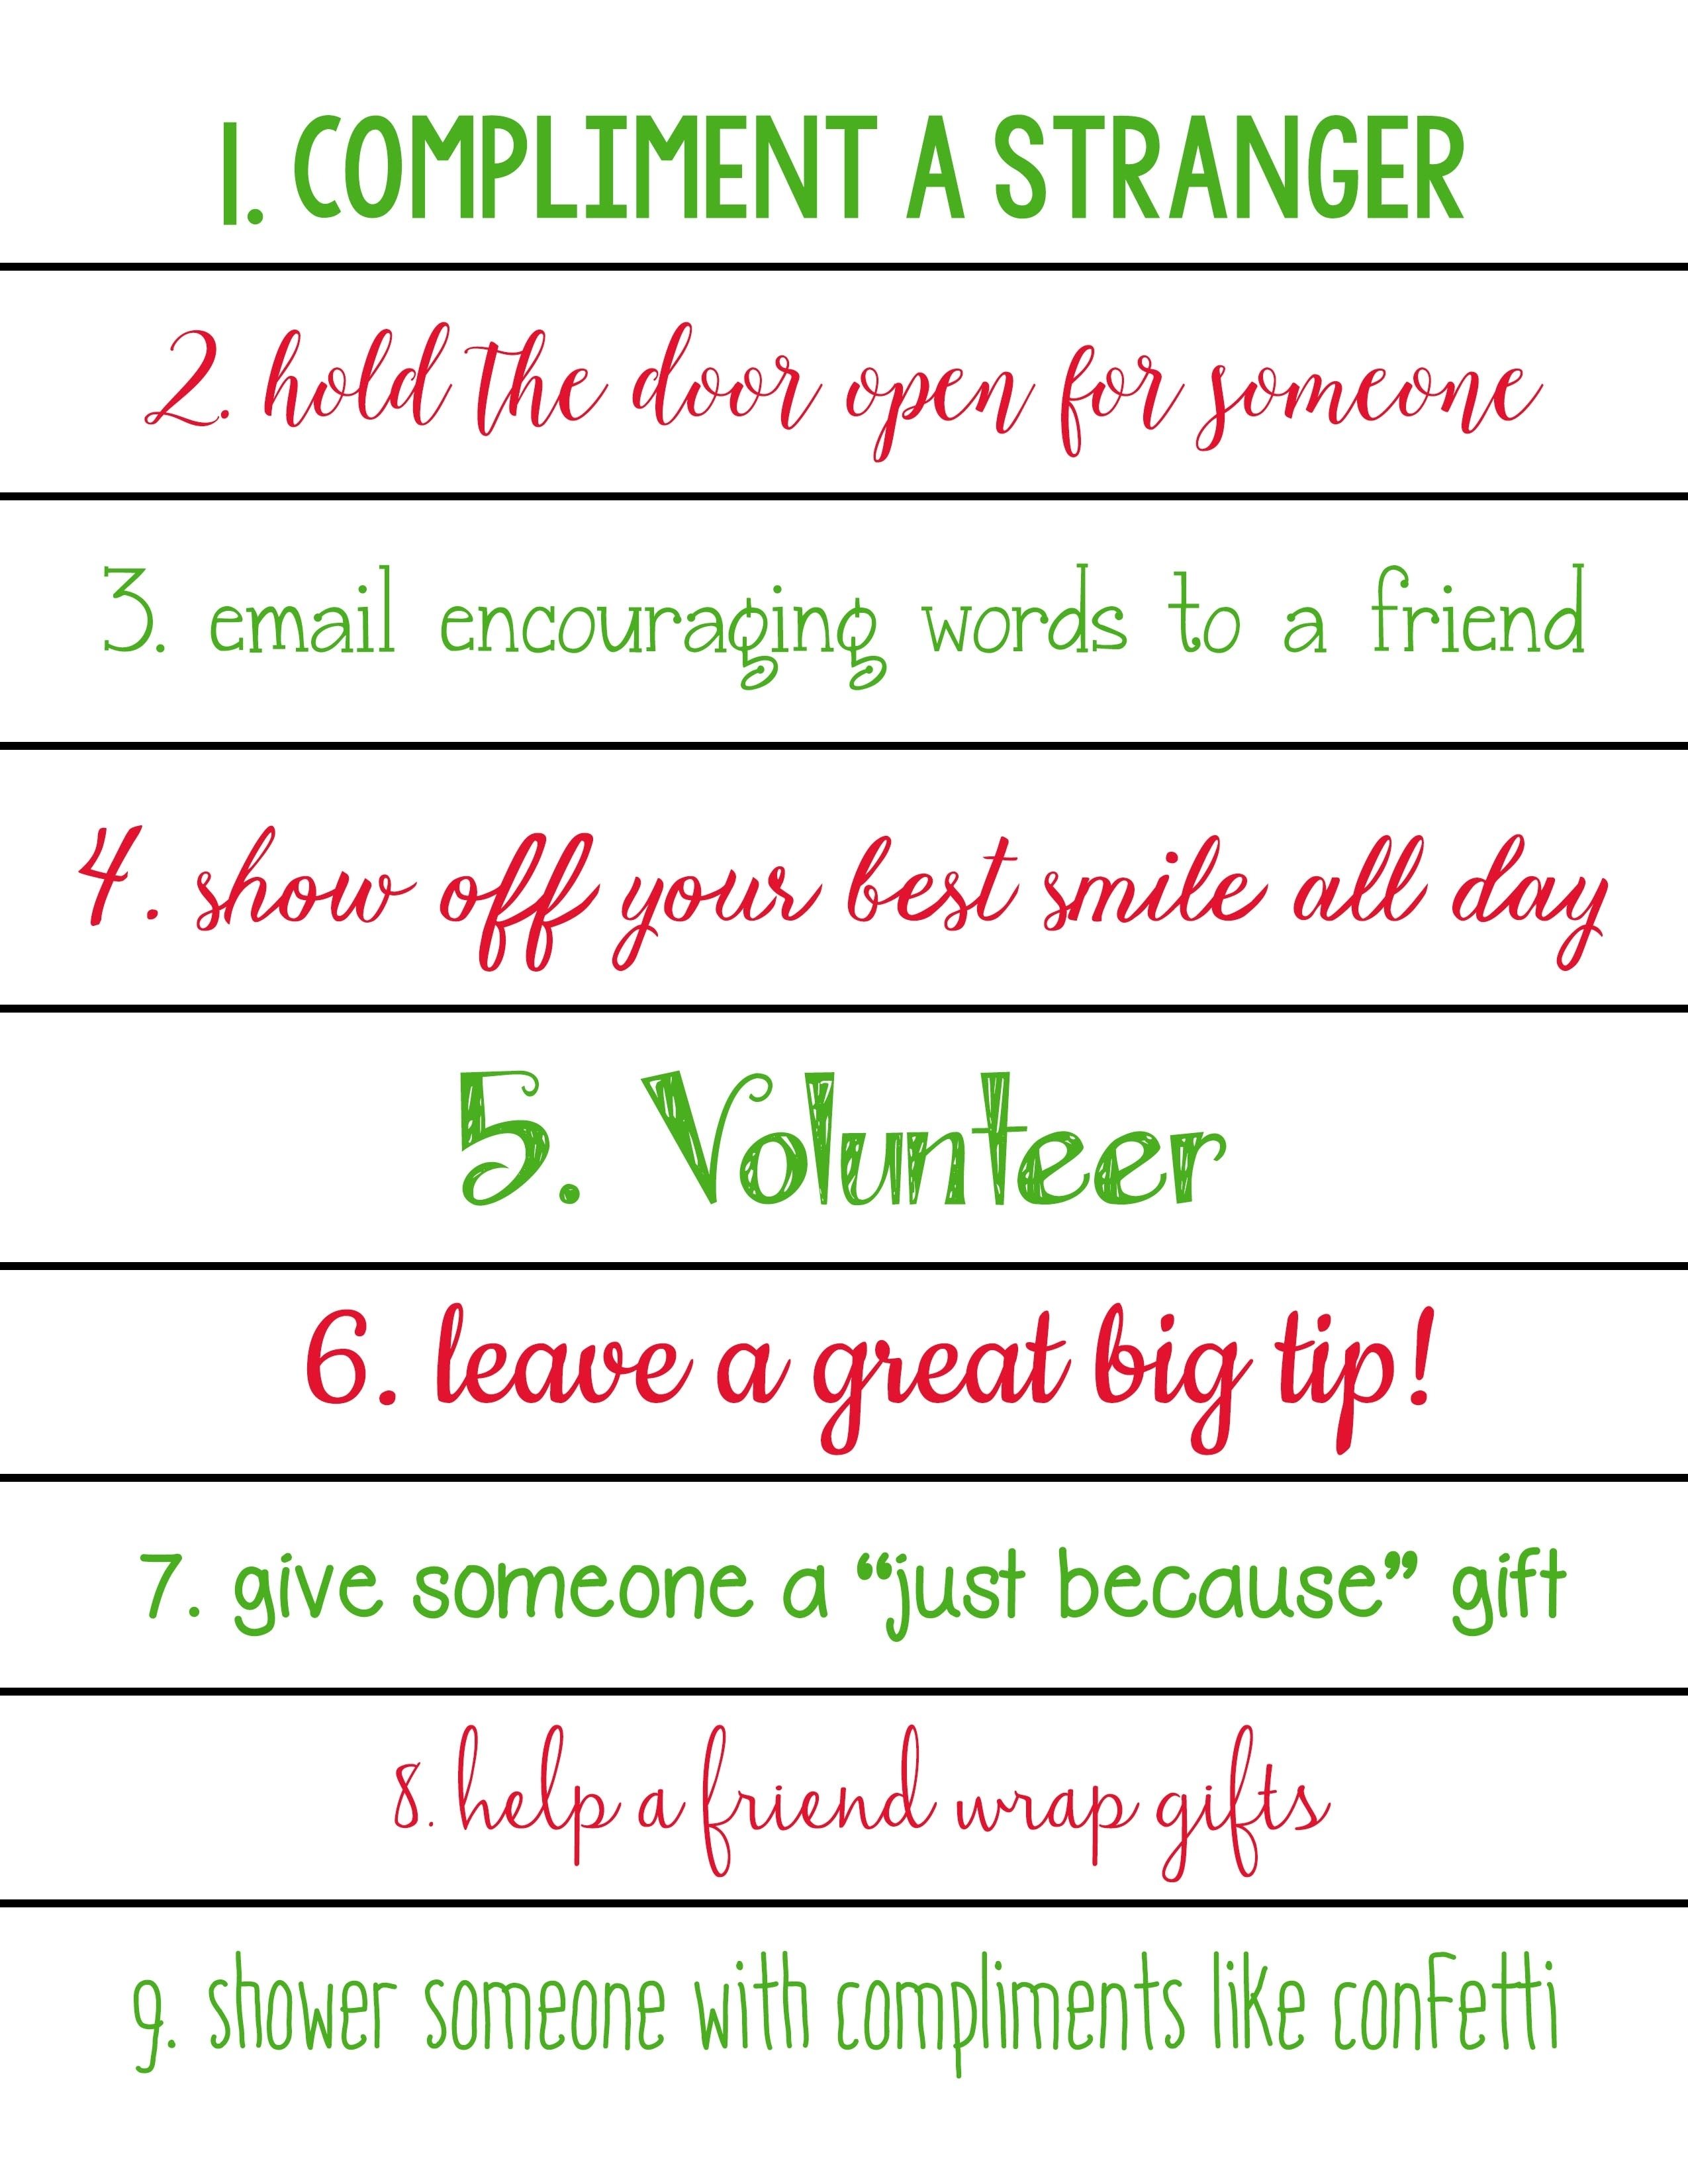 10-attractive-random-acts-of-christmas-kindness-ideas-2022